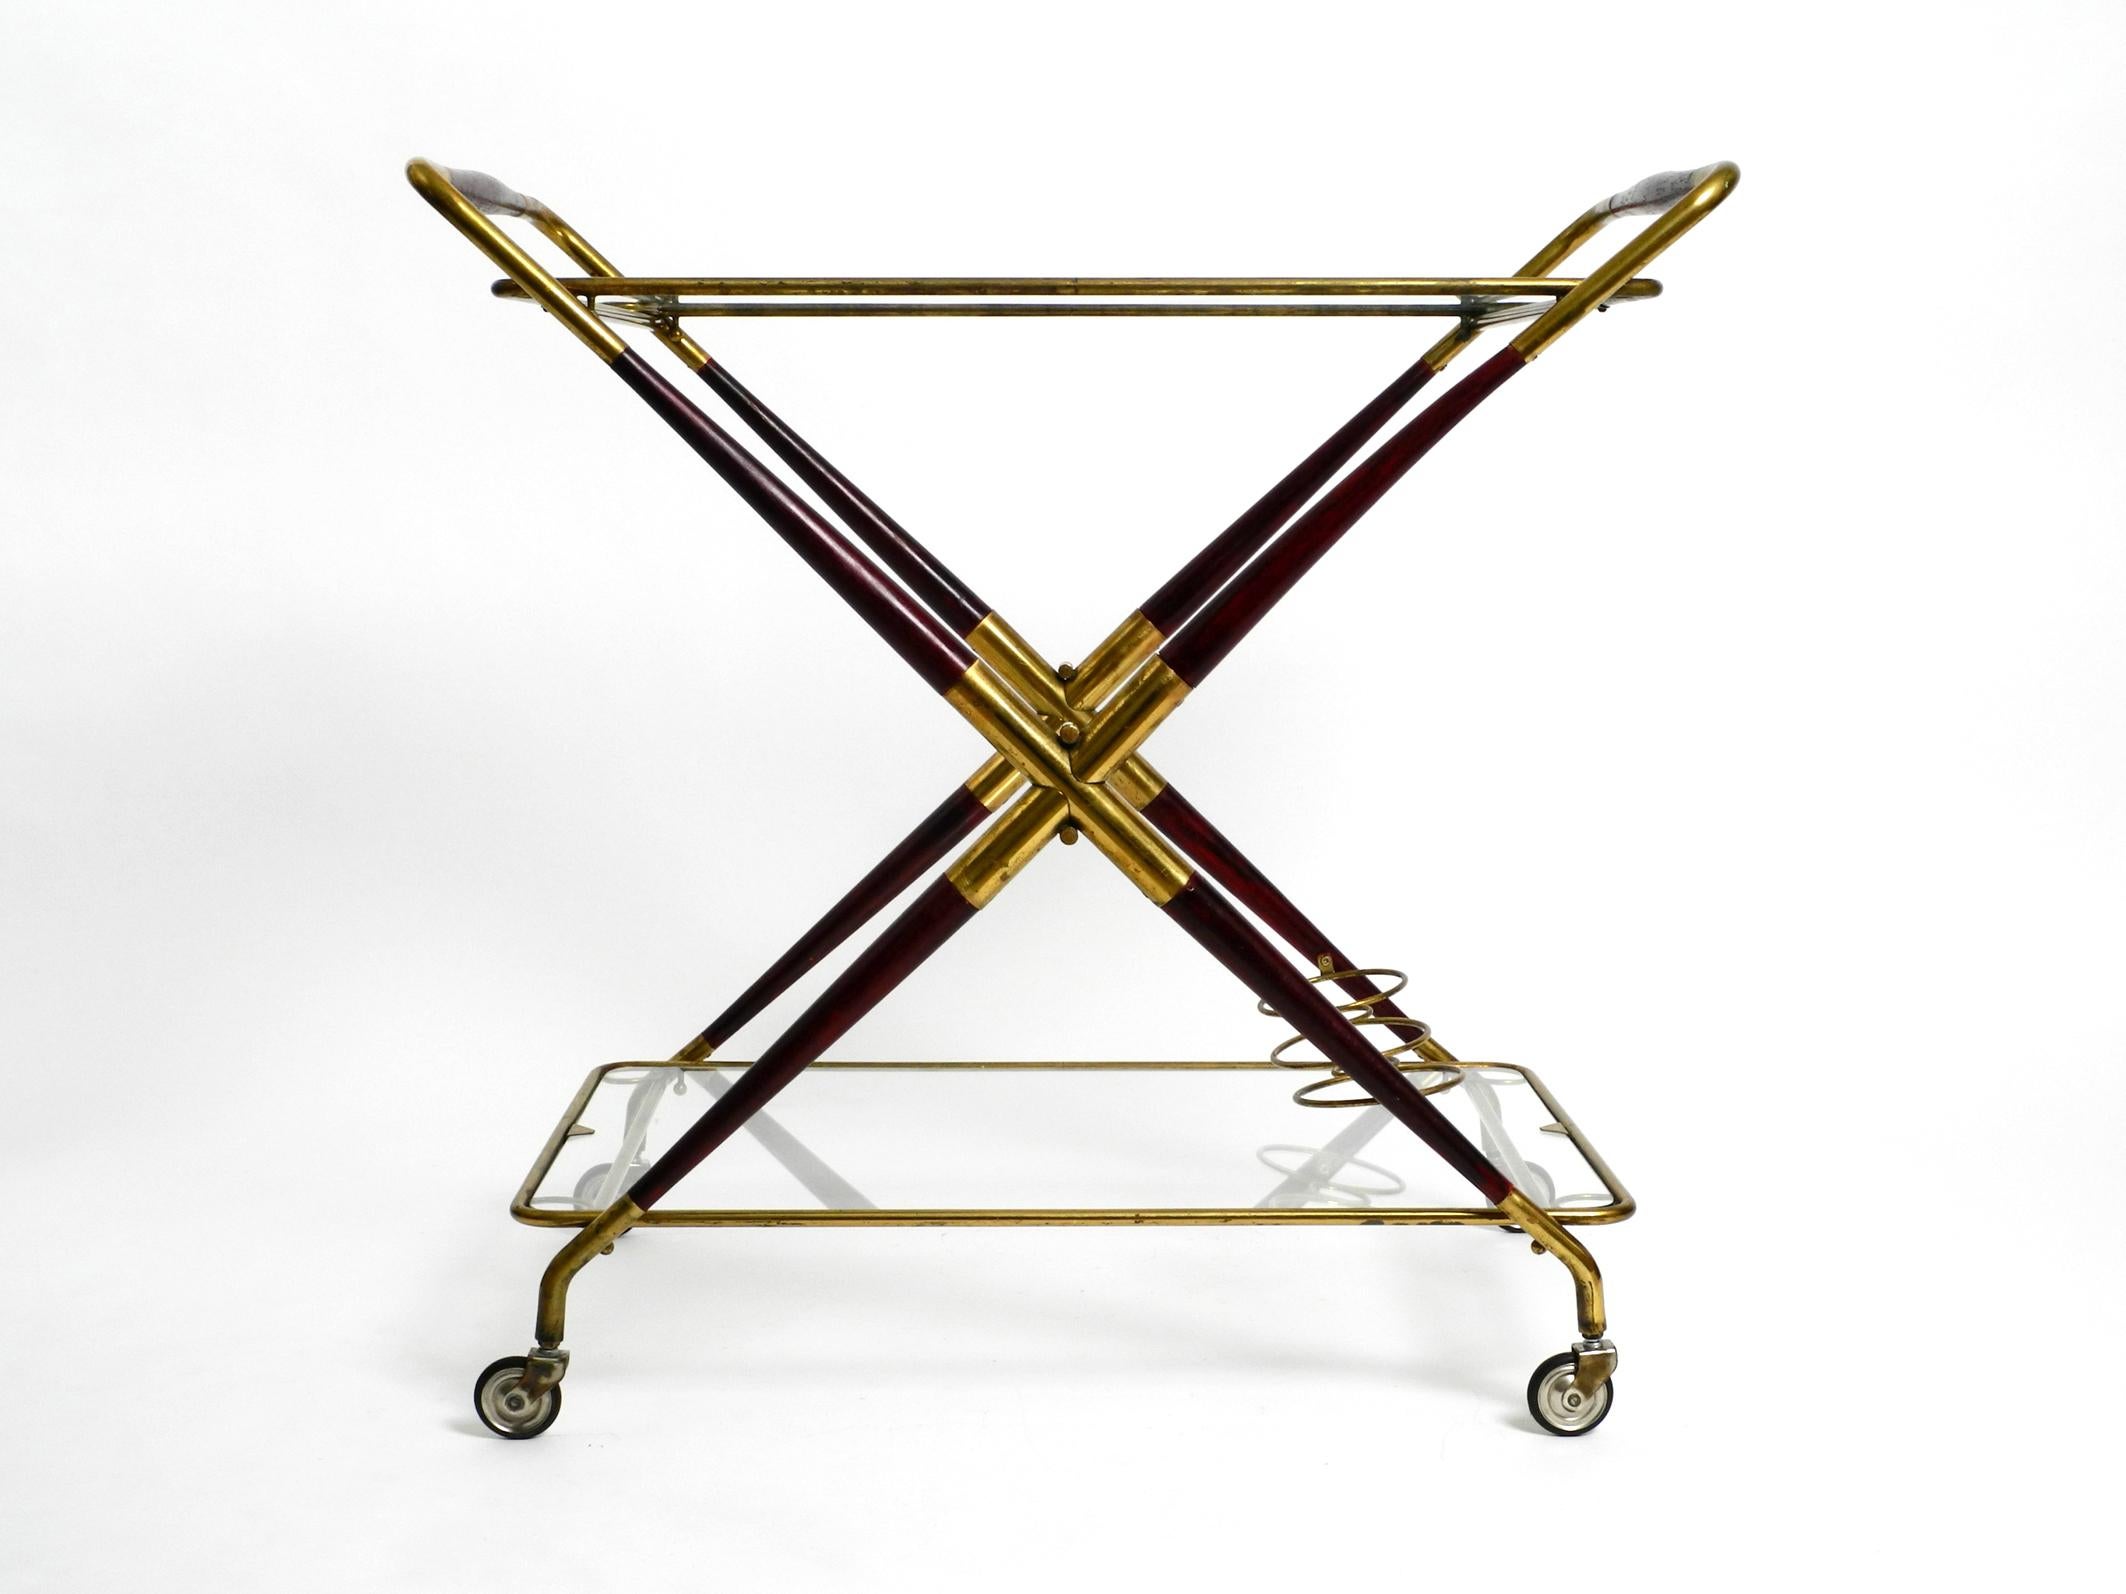 Rare midcentury Italian folding serving and bar cart.
Designed by Cesare Lacca. Made in Italy.
Great fancy 1960s Italian design.
Both glass shelves can be removed and the frame can be folded up.
Frame is made of brass and mahogany wood. Both